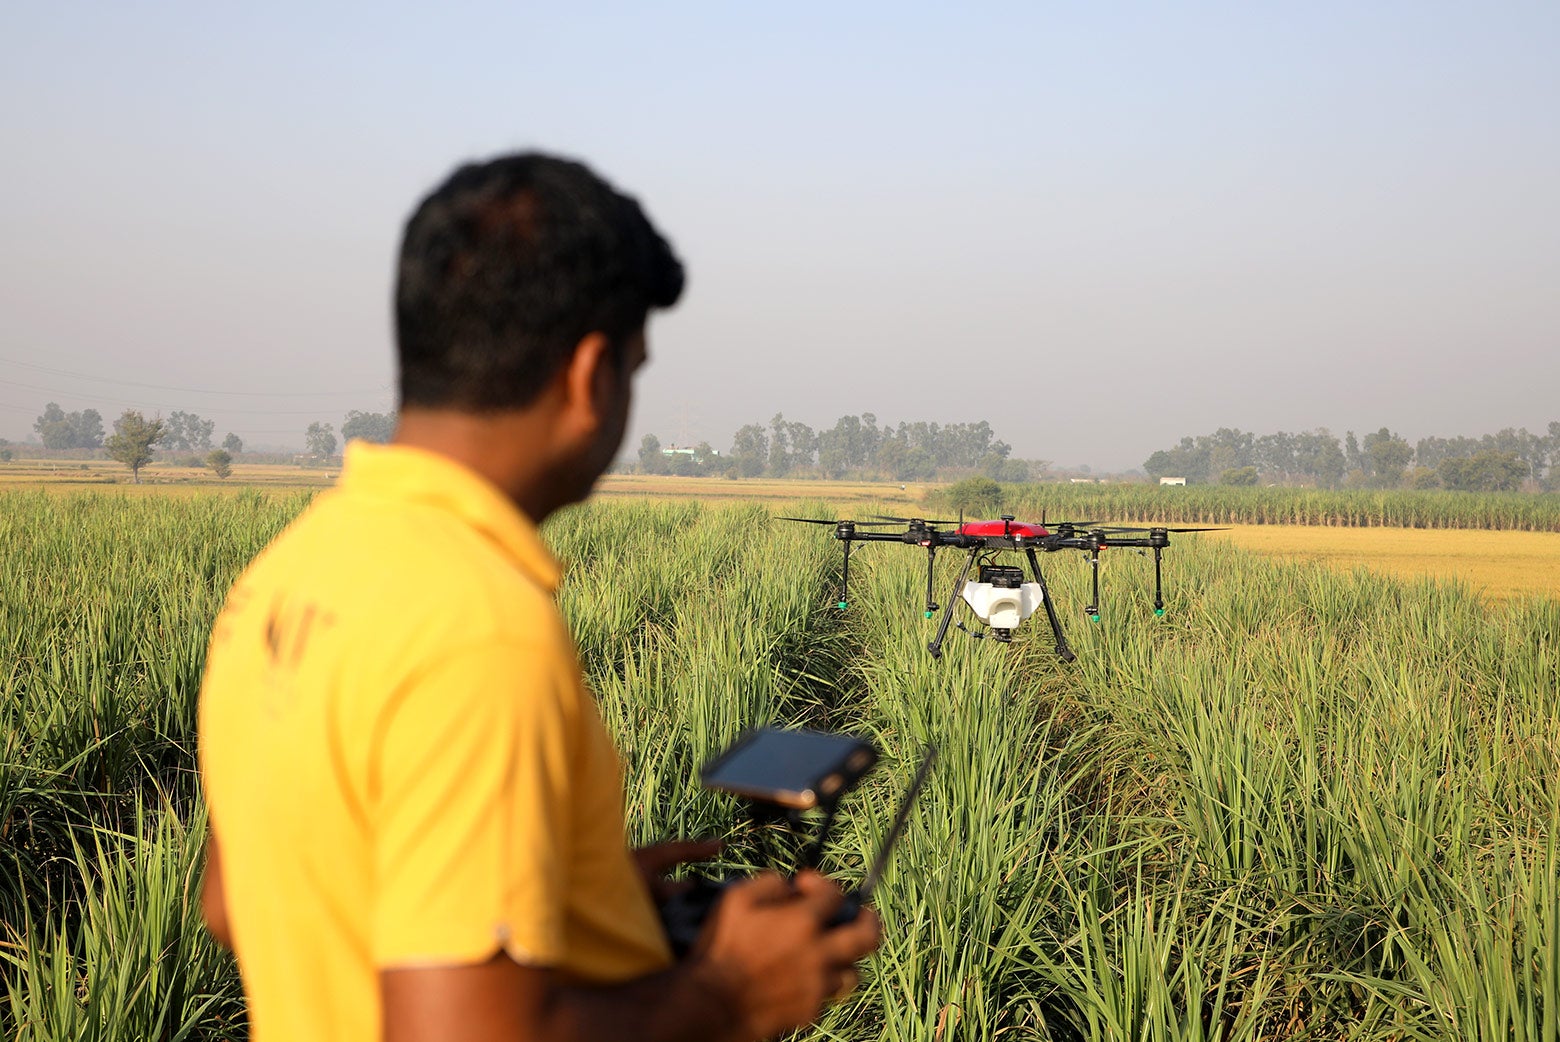 Indian Farm Workers Are Being Replaced by Drones. They Fear a Much Darker Future.